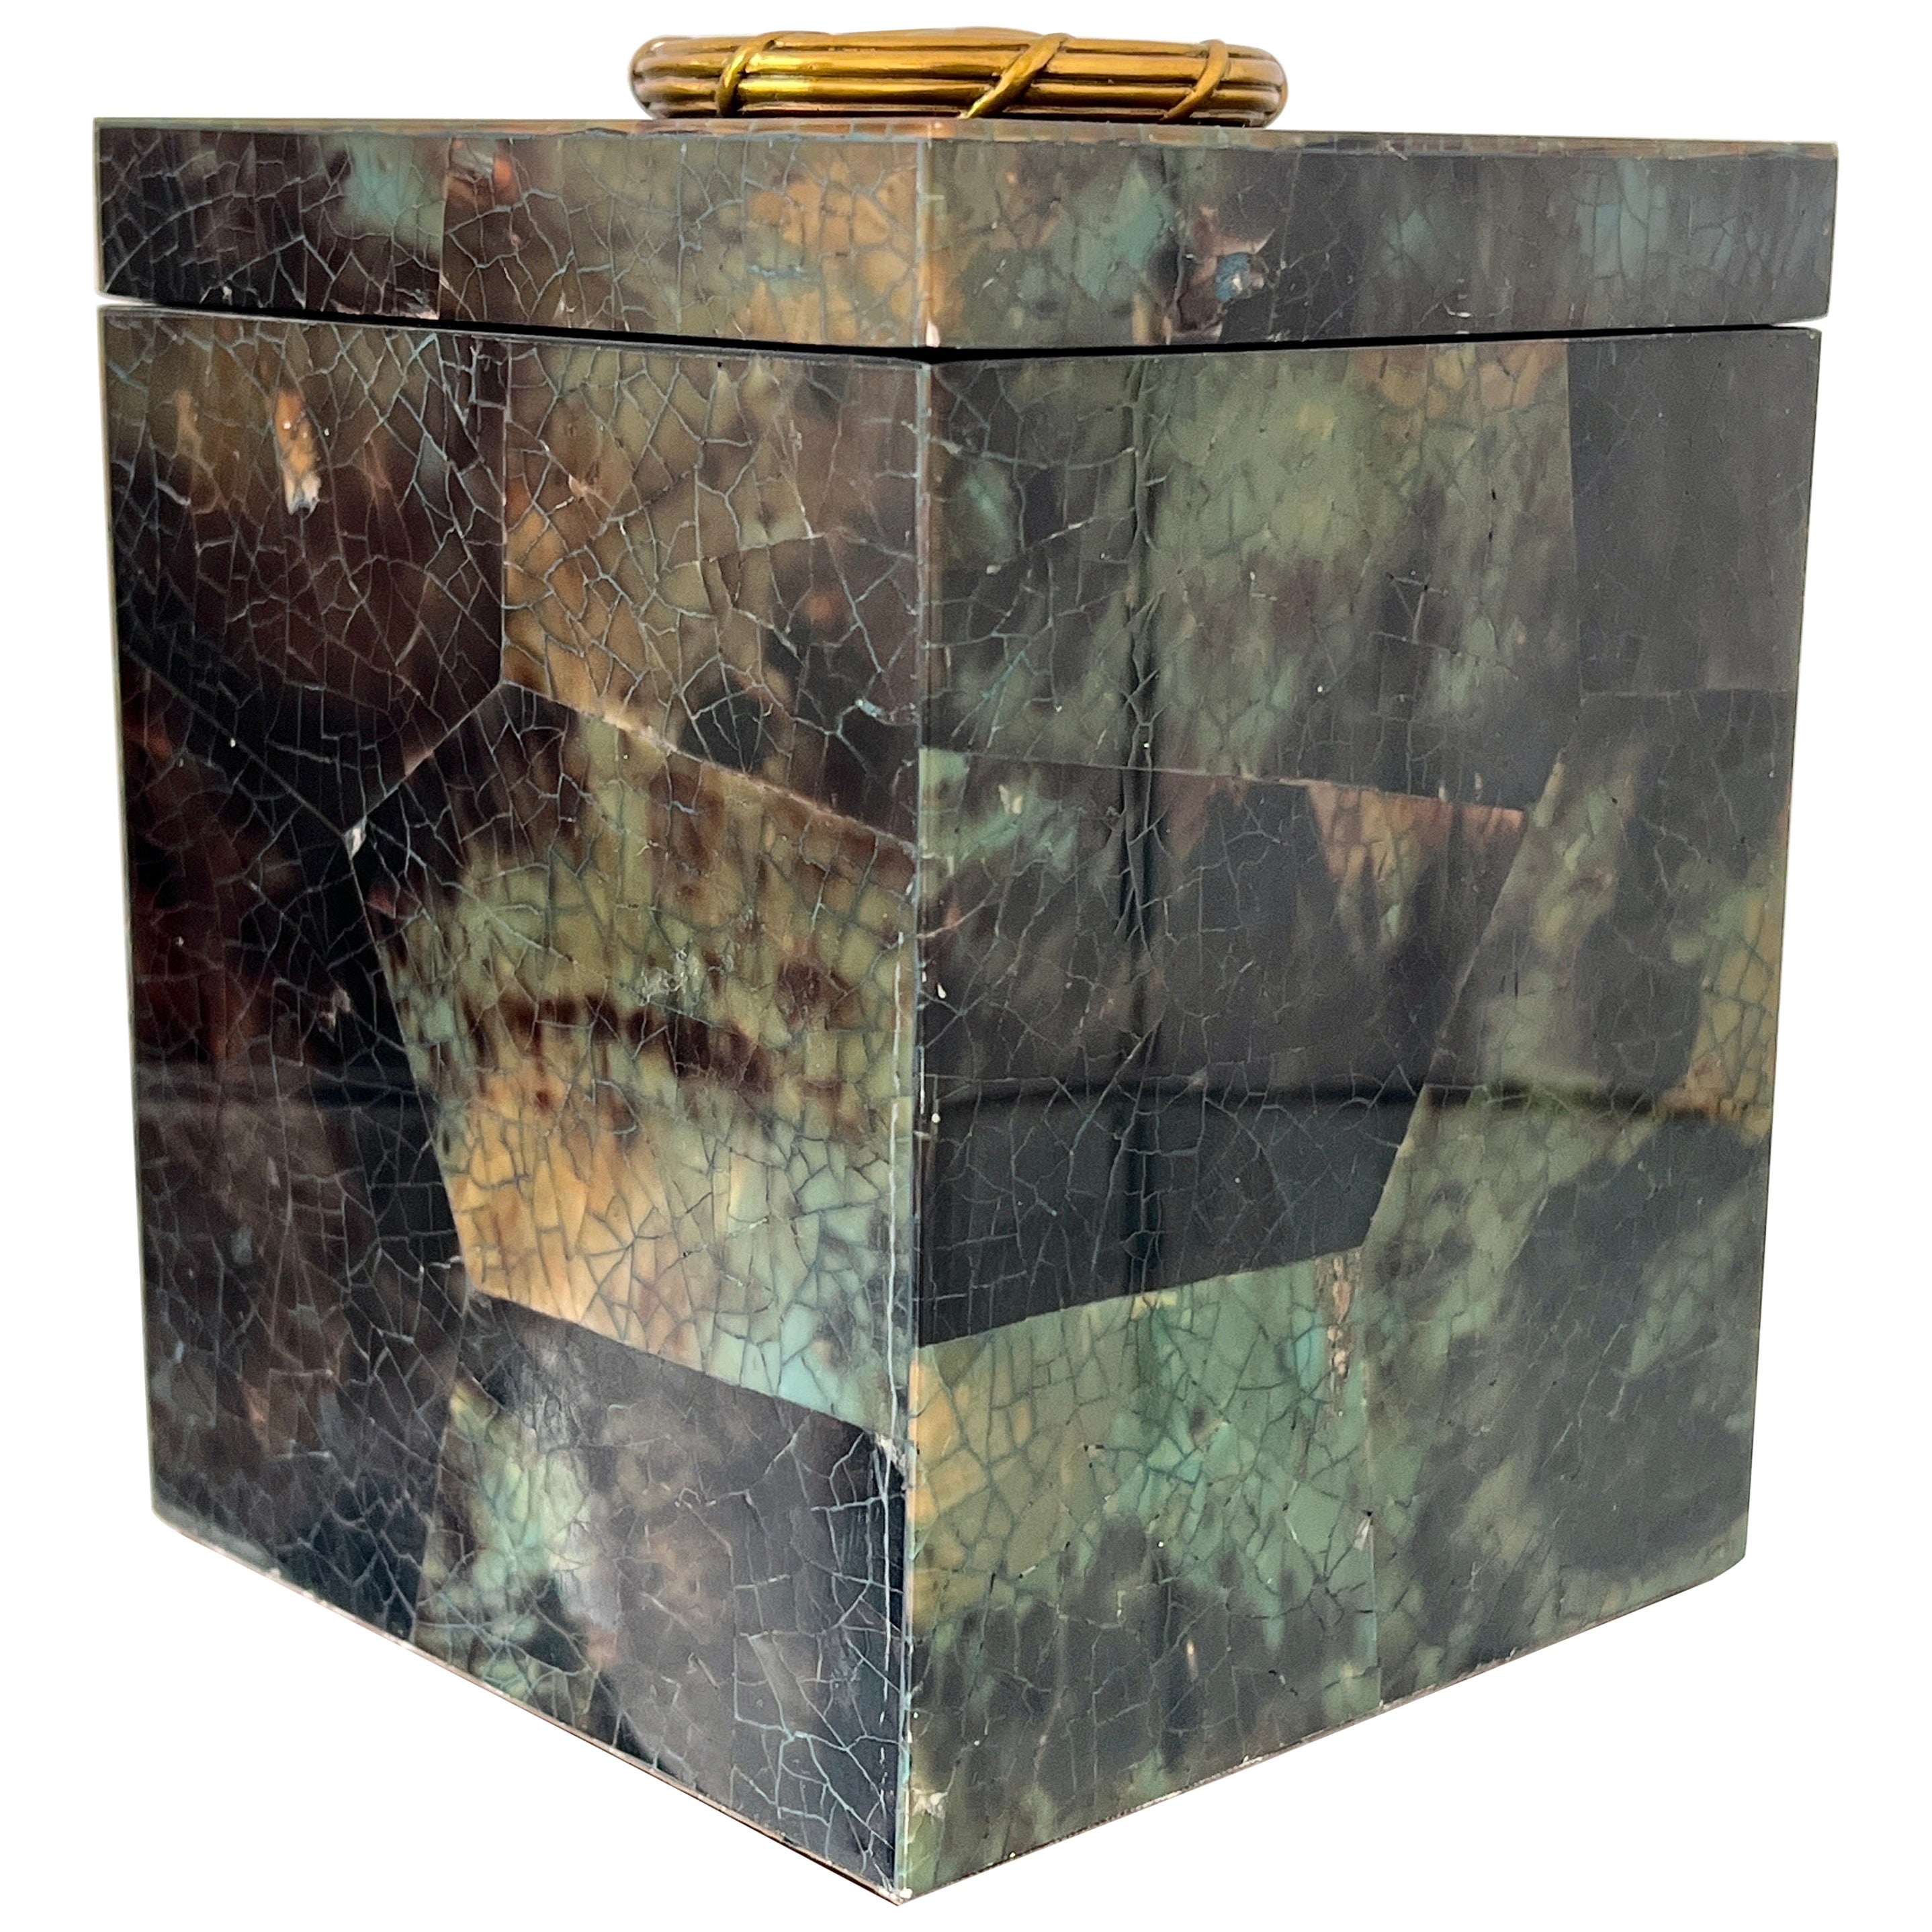 Mosaic Green Penshell Box with Brass Accent by Maitland Smith